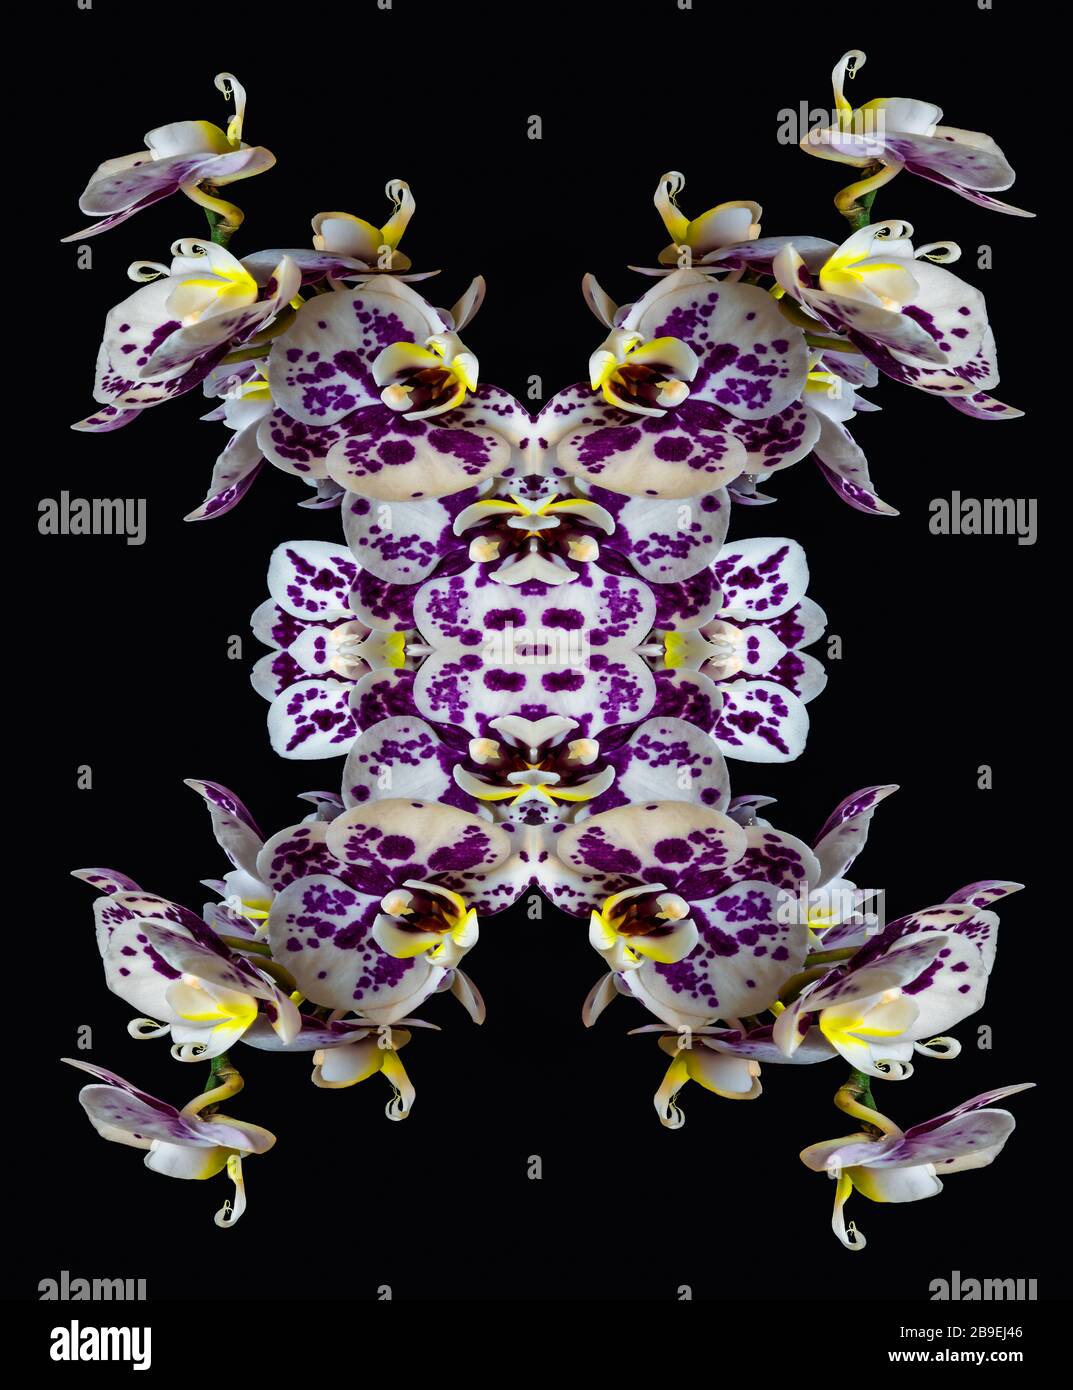 Surrealistic symmetrical pattern of white blue violet orchid blossoms on black background Stock Photo